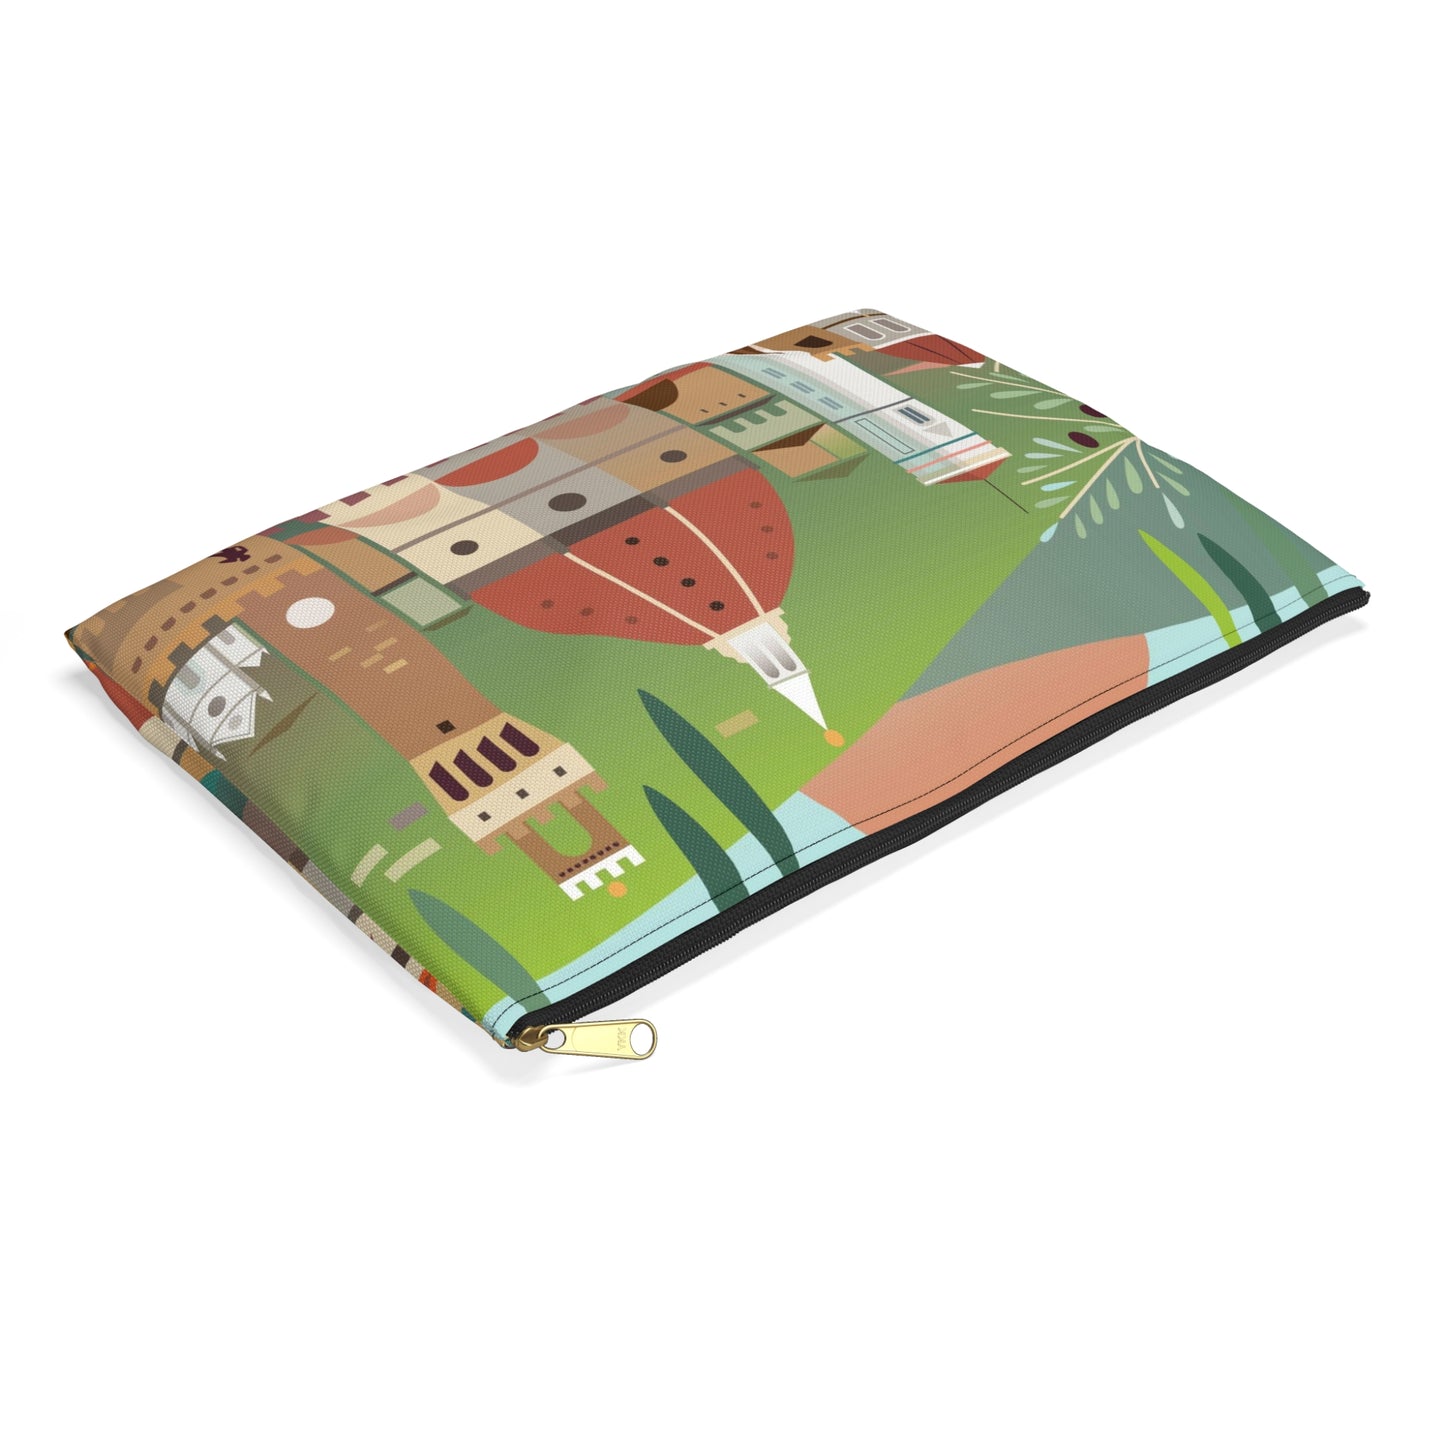 Florence Zip Pouch